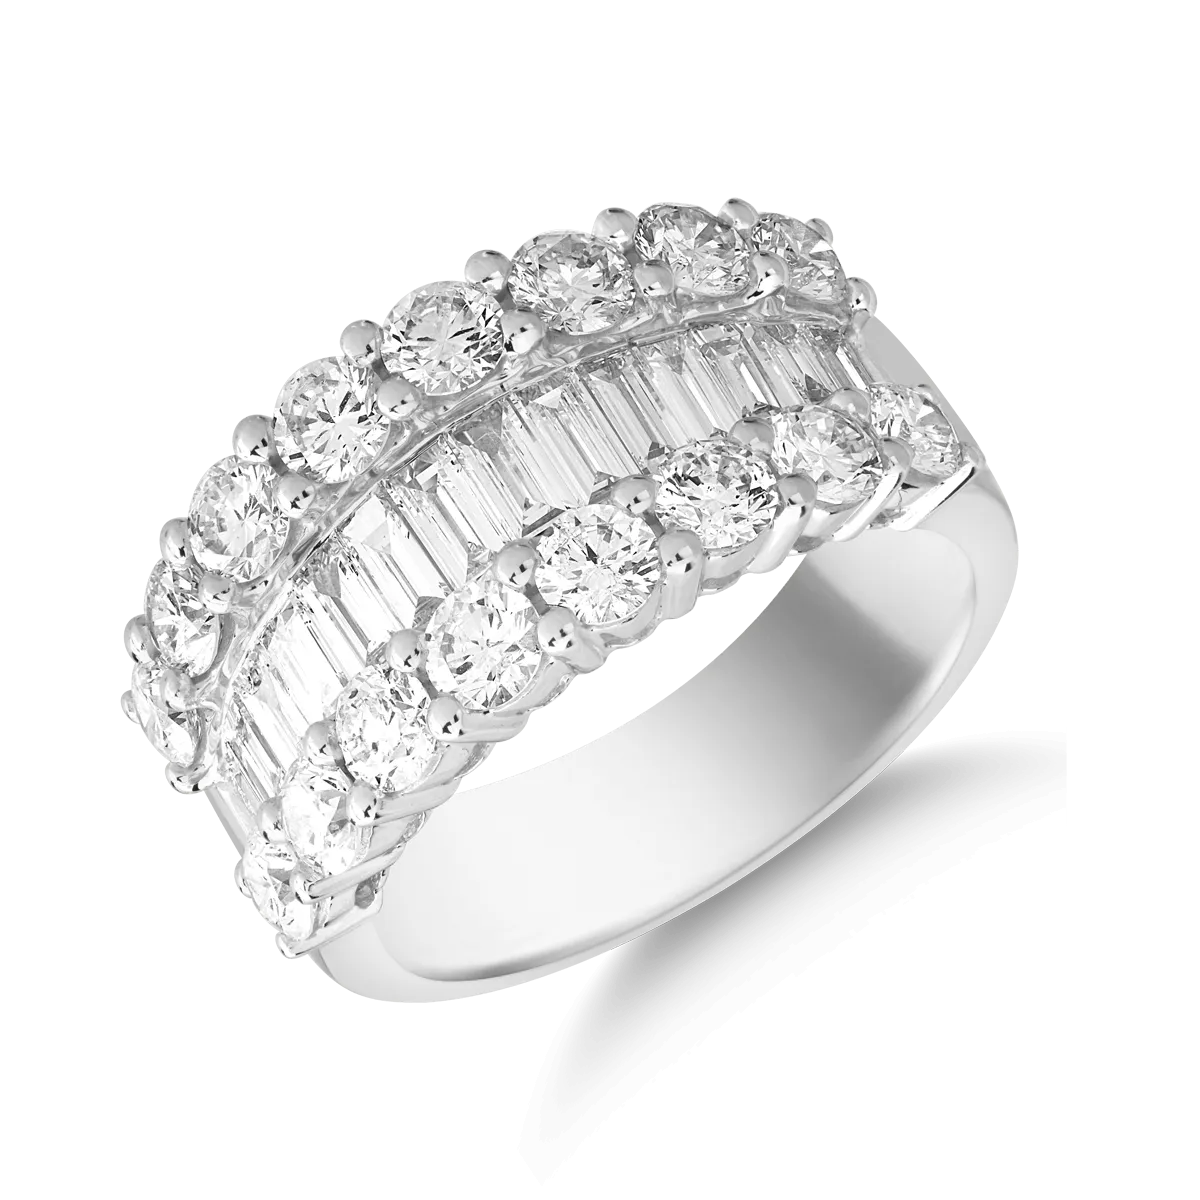 18K white gold ring with 2.91ct diamonds